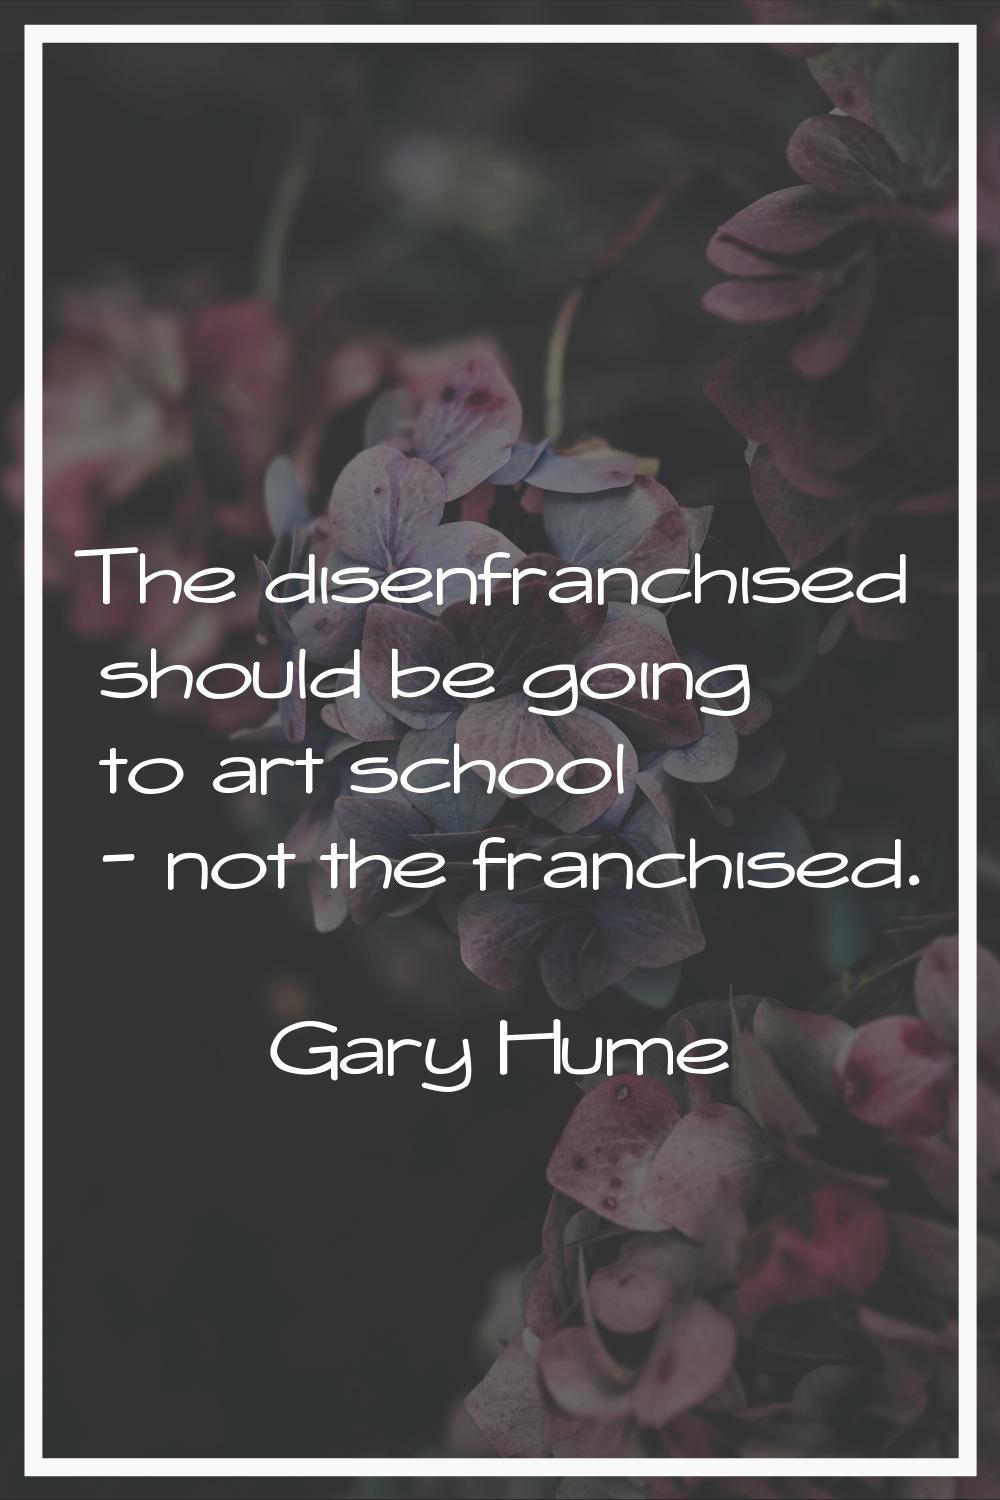 The disenfranchised should be going to art school - not the franchised.